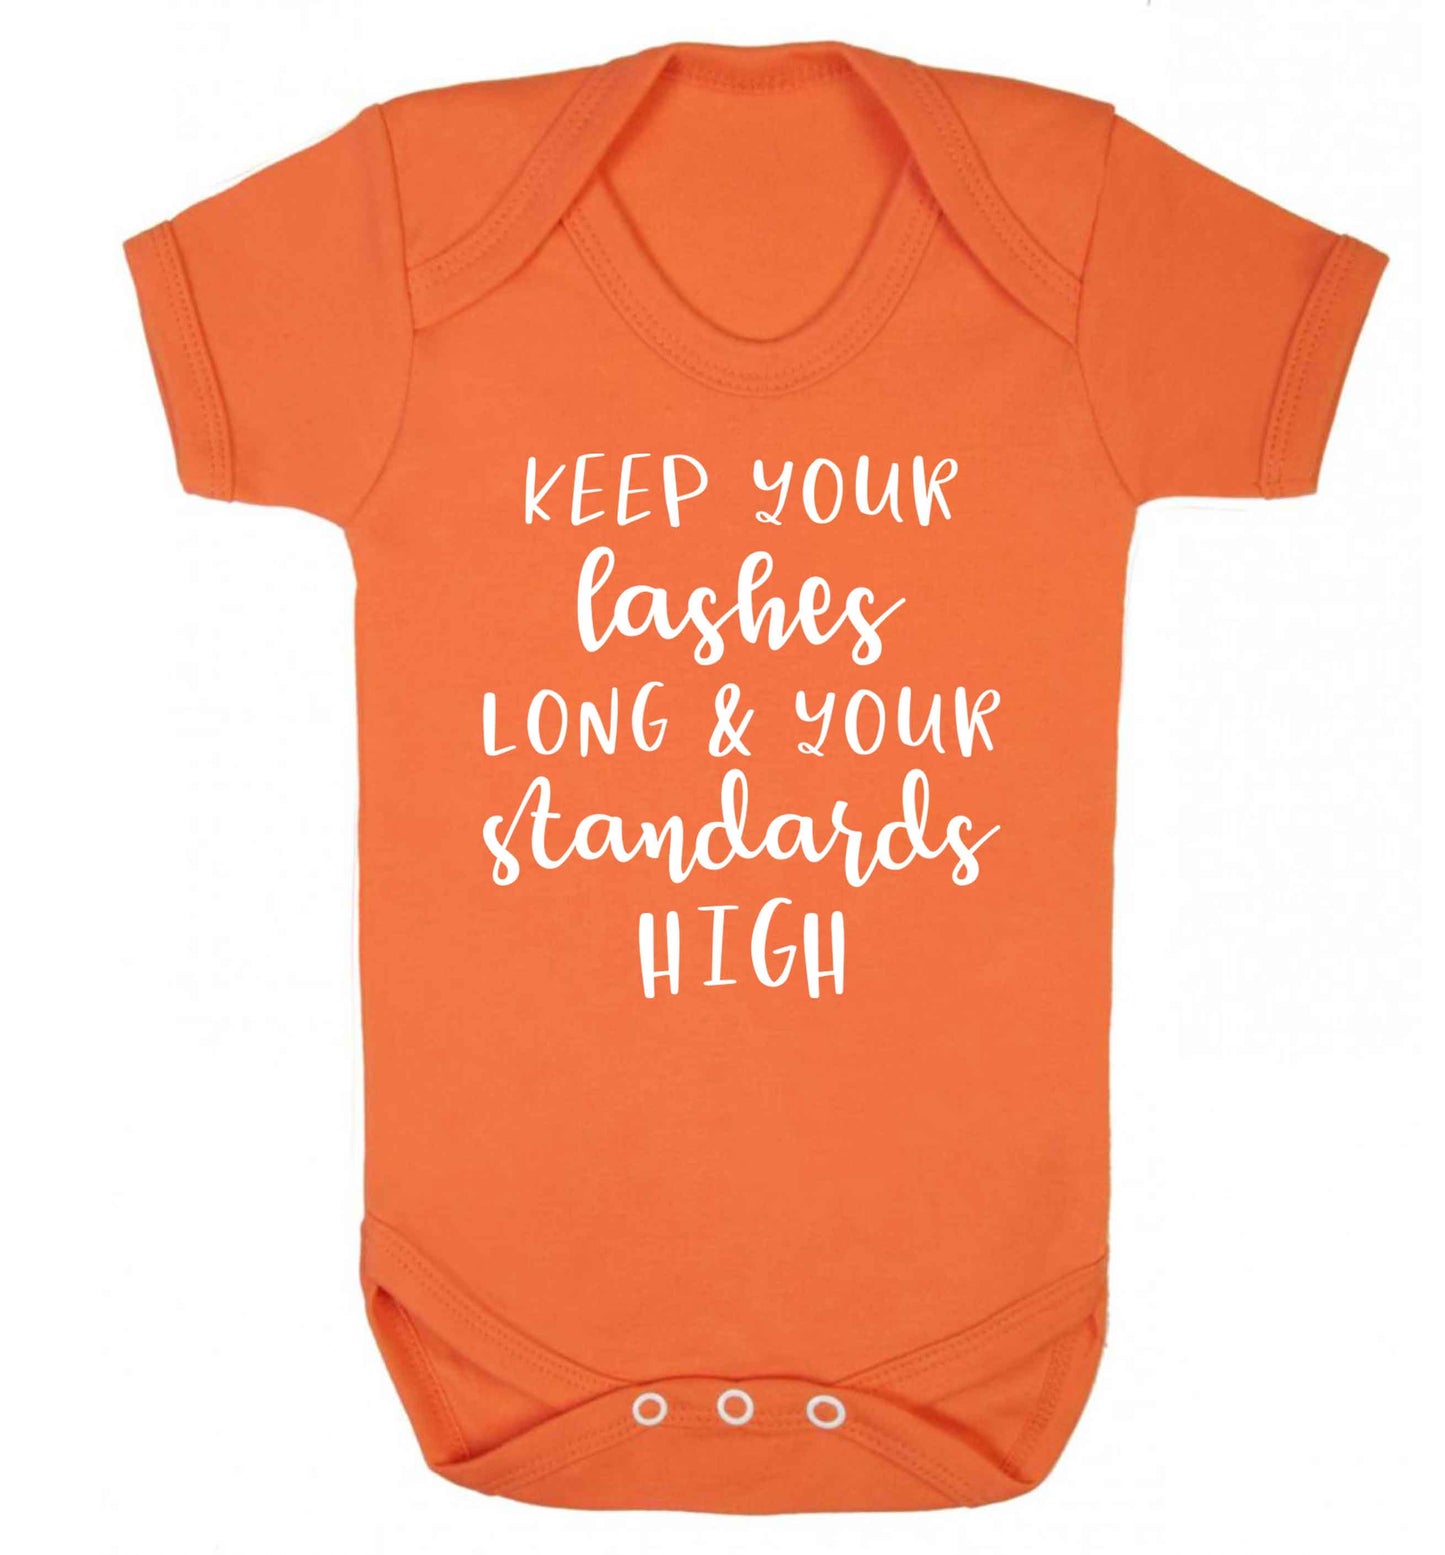 Keep your lashes long and your standards high Baby Vest orange 18-24 months